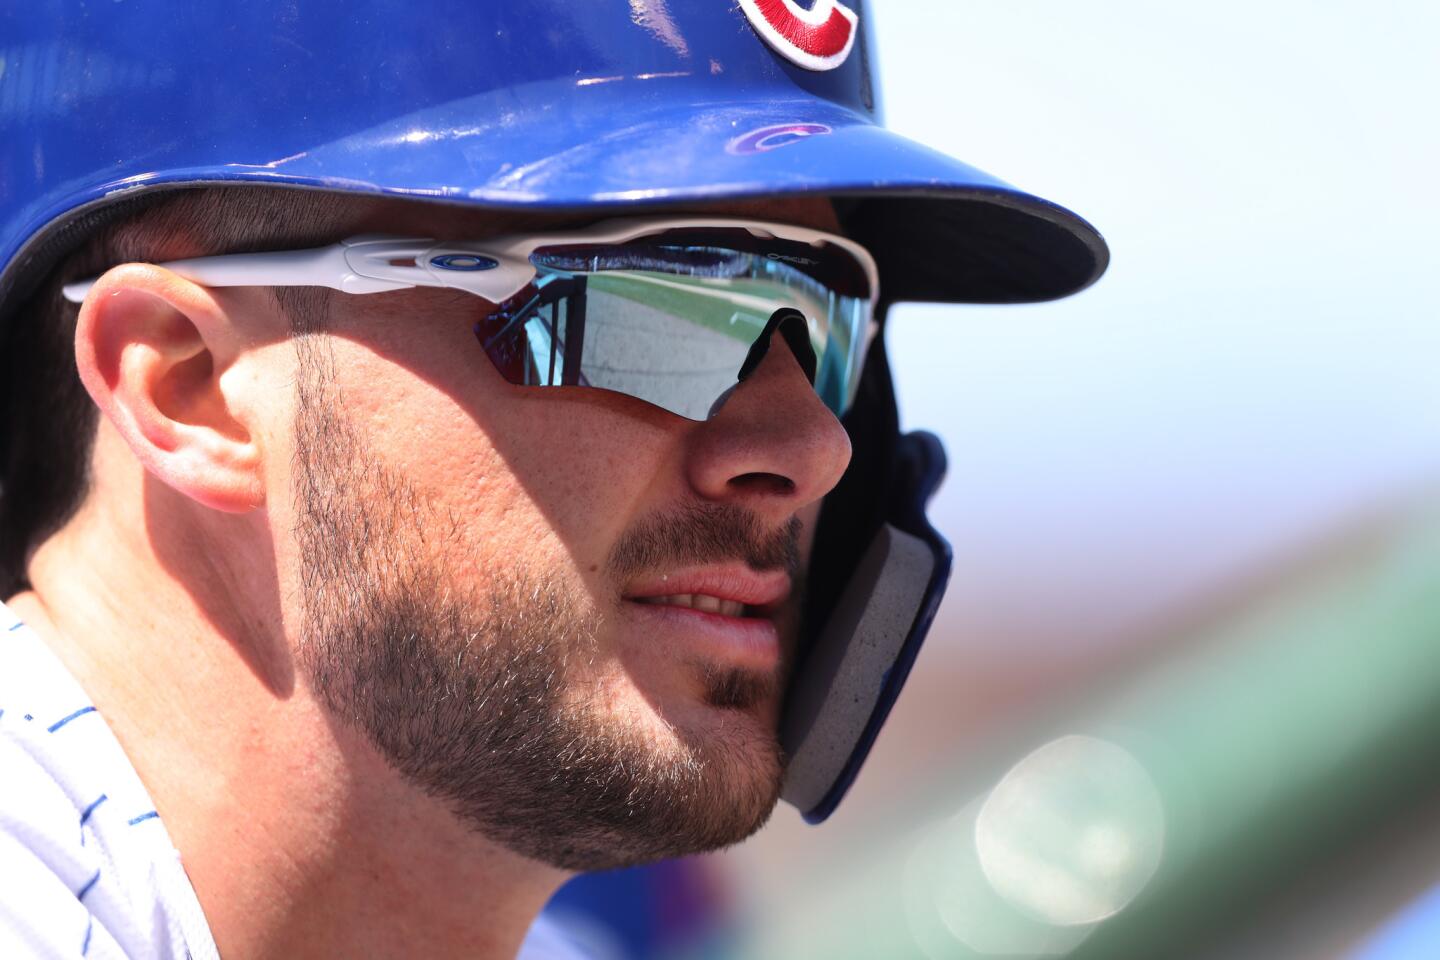 Kris Bryant looks out of the dugout before his at-bat in the third inning against the Milwaukee Brewers at Wrigley Field in Chicago on Saturday, April 28, 2018.